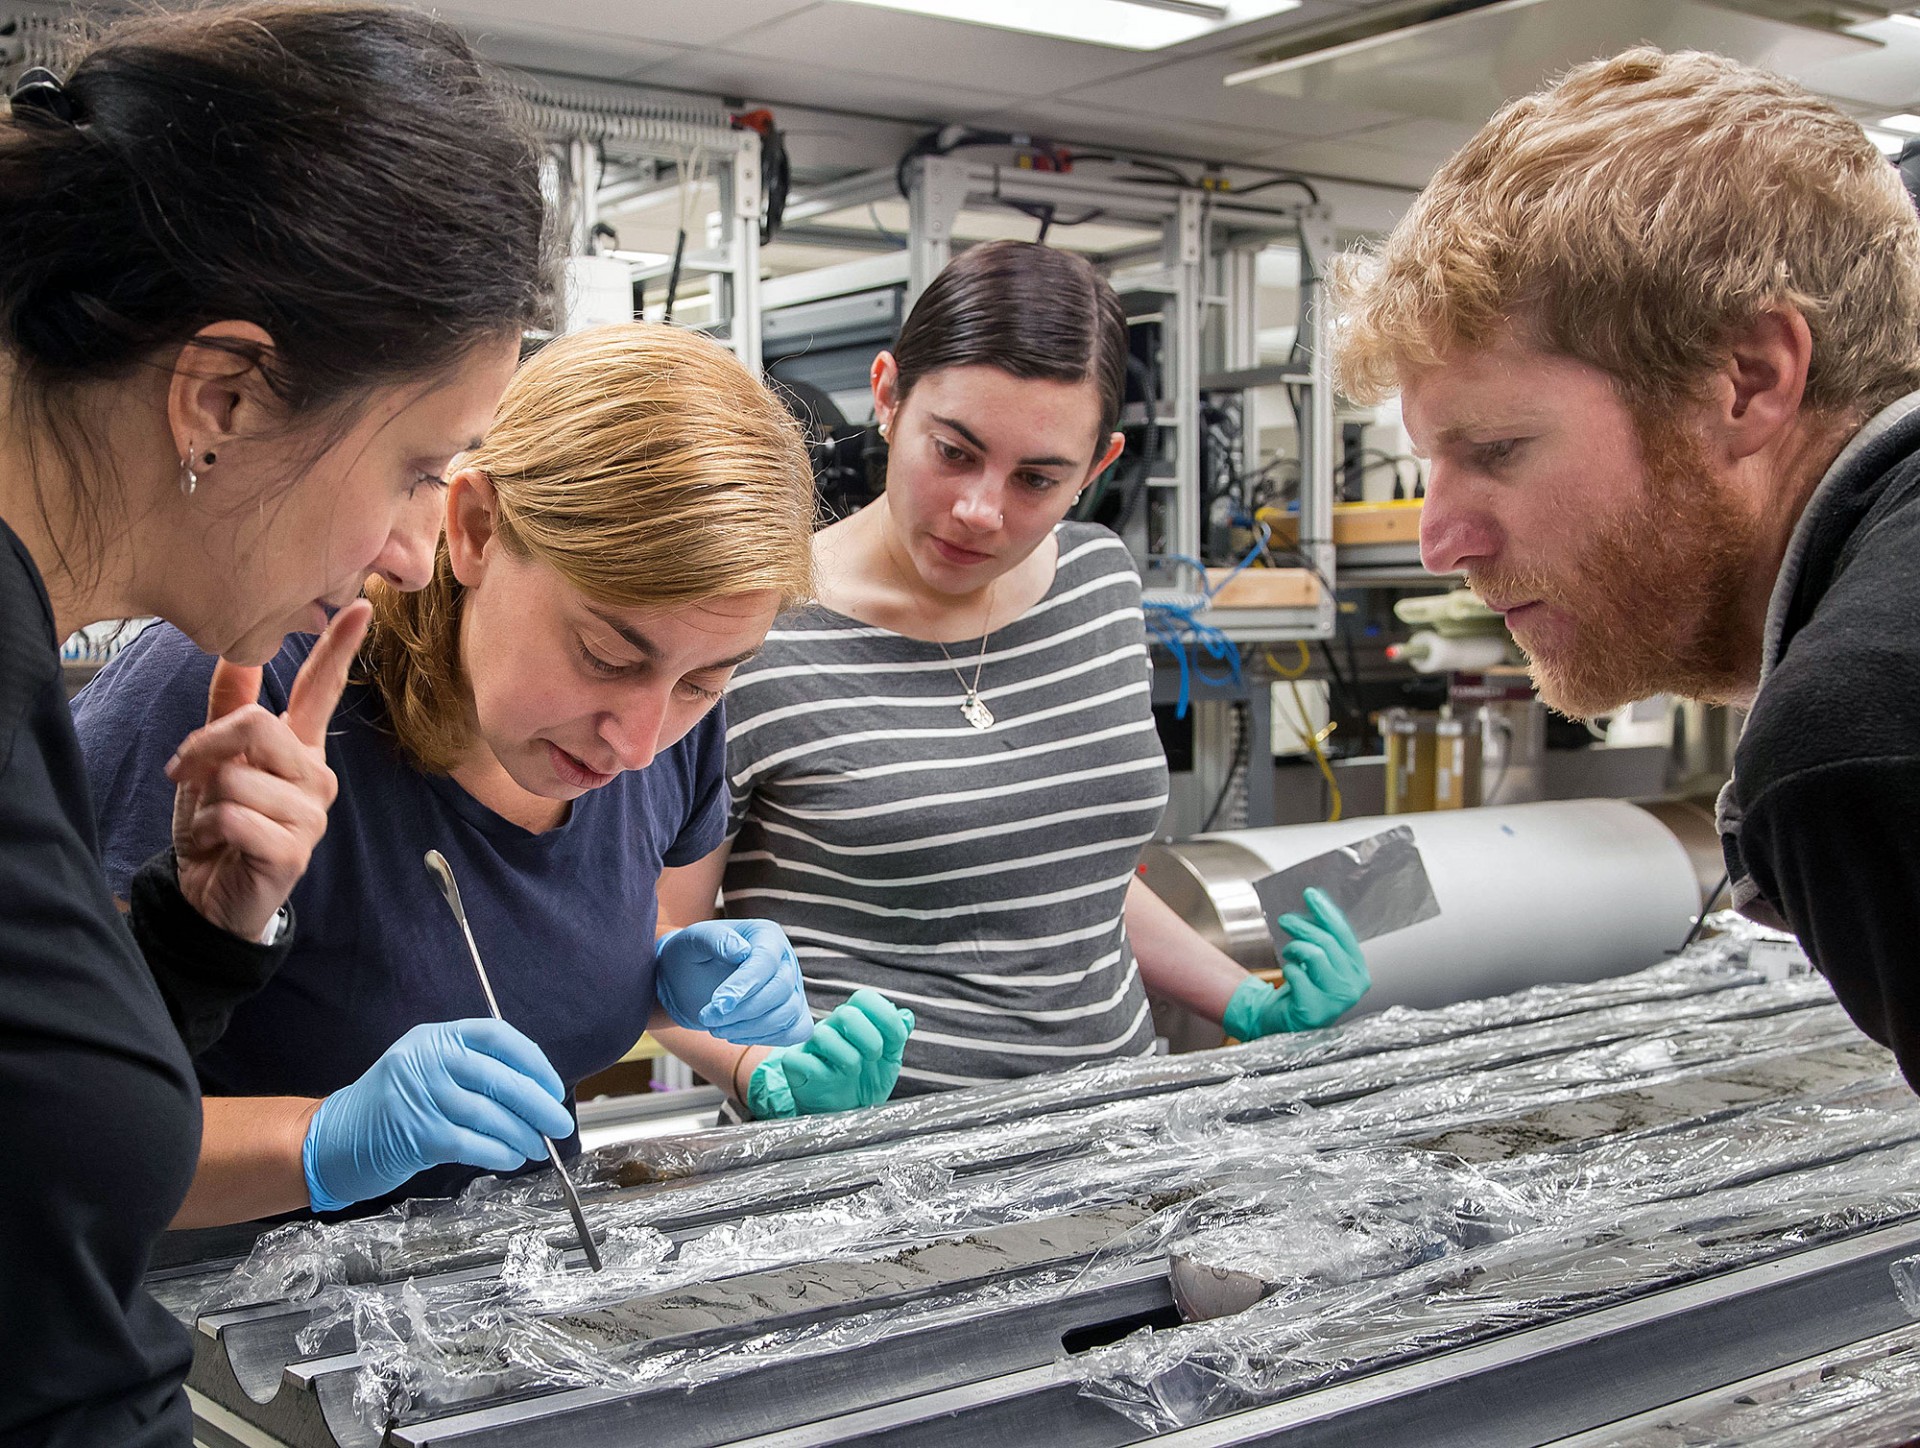 Scientists examine and describe a deep sea core retrieved on IODP Expedition 375 in the Hikurangi Subduction Margin. Credit: Tim Fulton, IODP/JRSO.